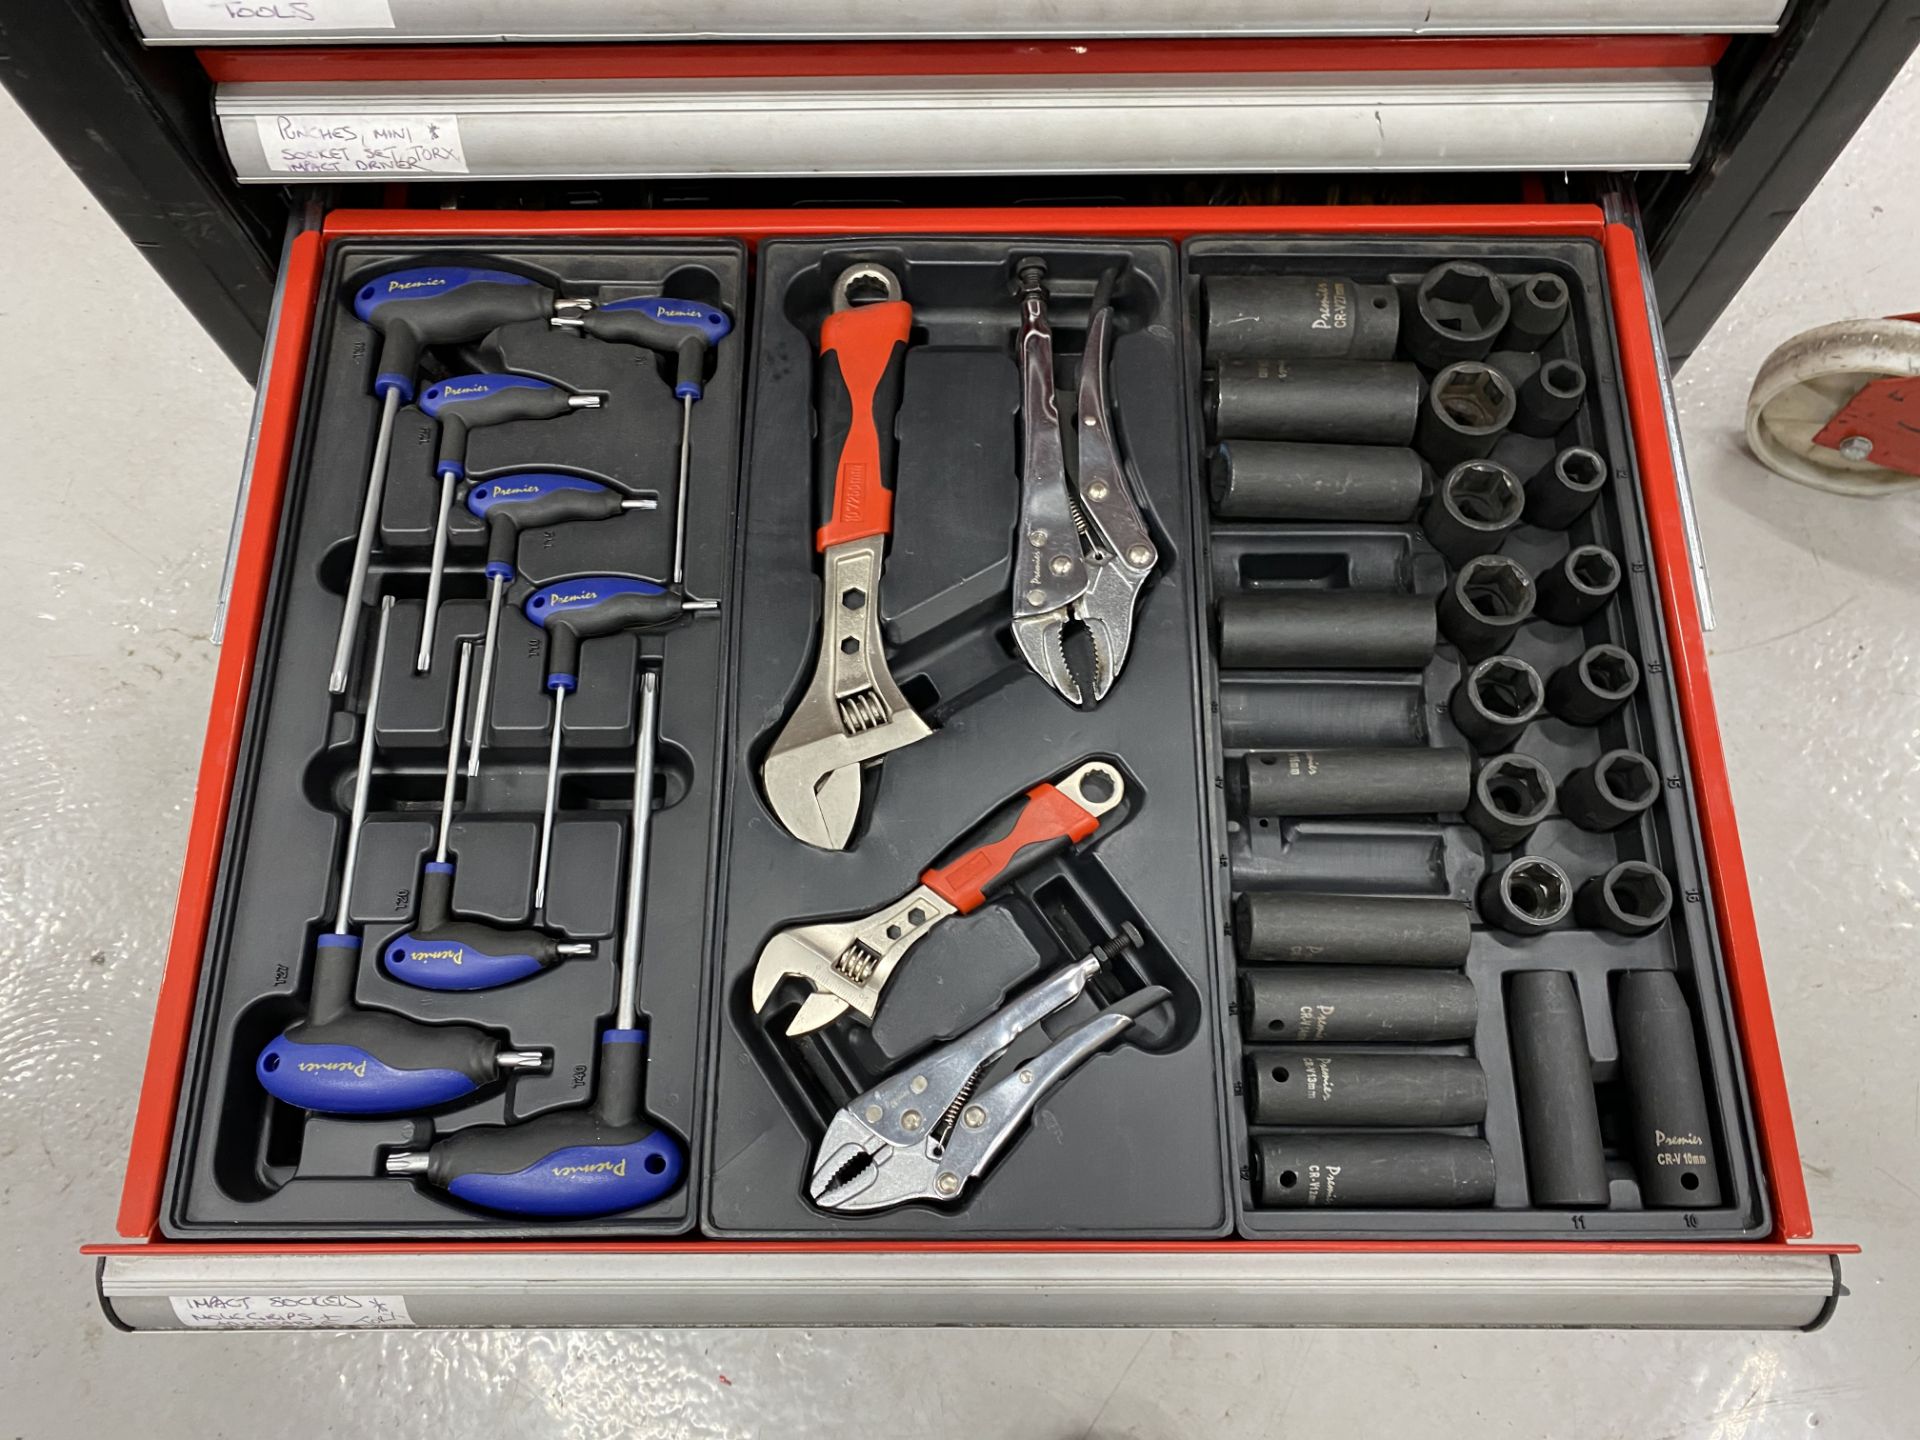 Sealey 10 drawer mobile toolbox including the following tools, rings and open ended spanners 7mm- - Image 8 of 11